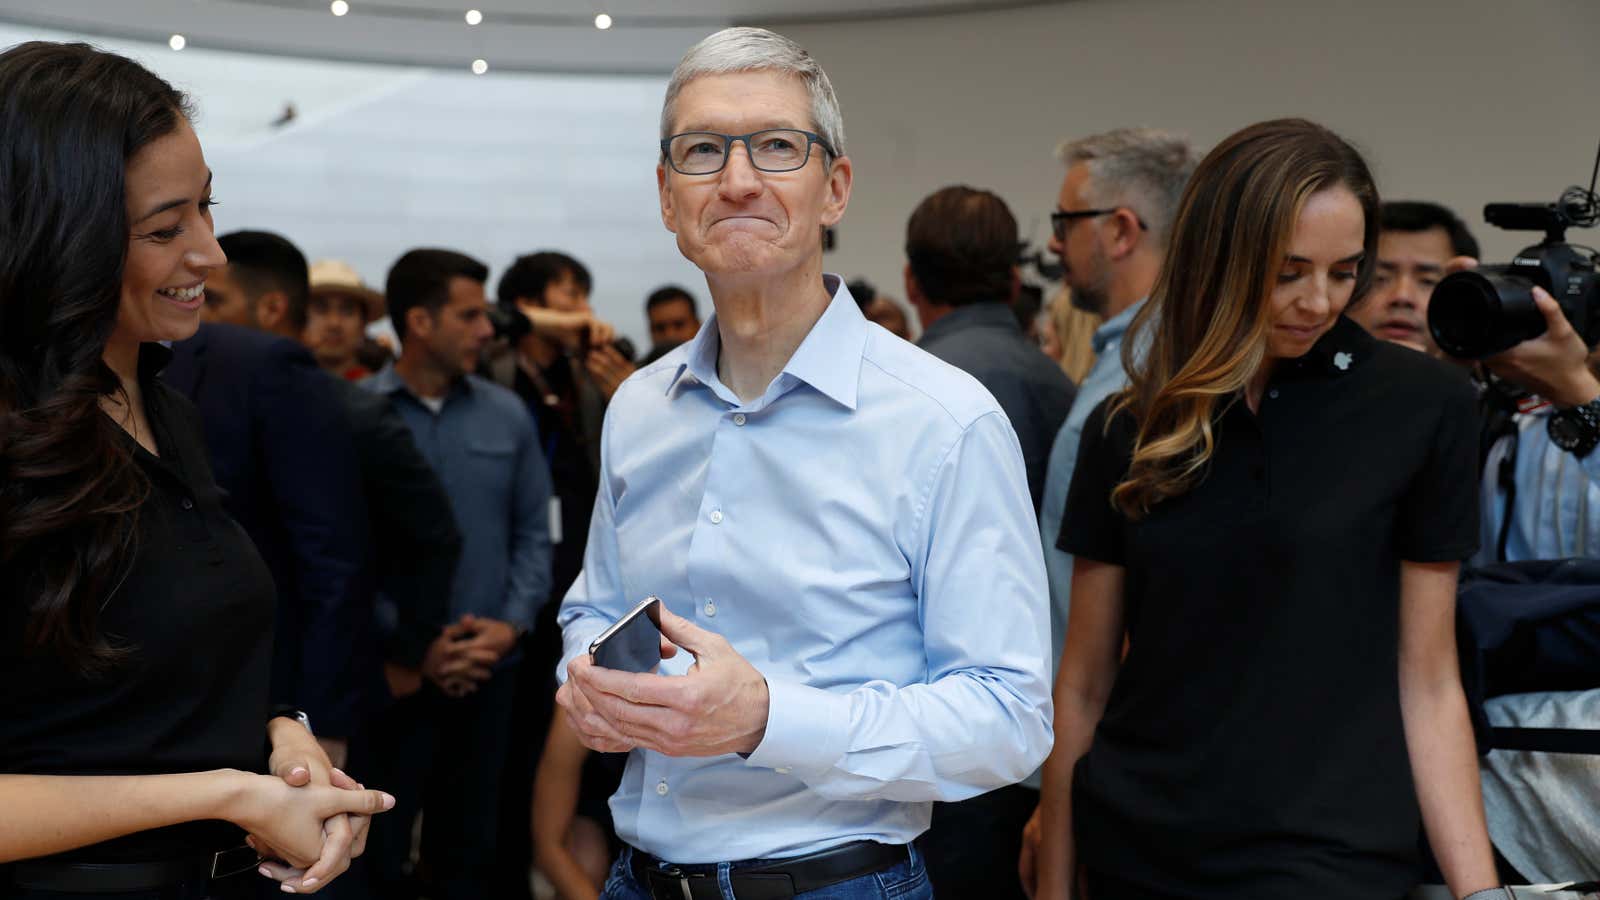 Tim Cook, CEO of Apple, demonstrates an iPhone following a launch event in Cupertino, California, U.S. September 12, 2017. REUTERS/Stephen Lam – HP1ED9C1JO8DM